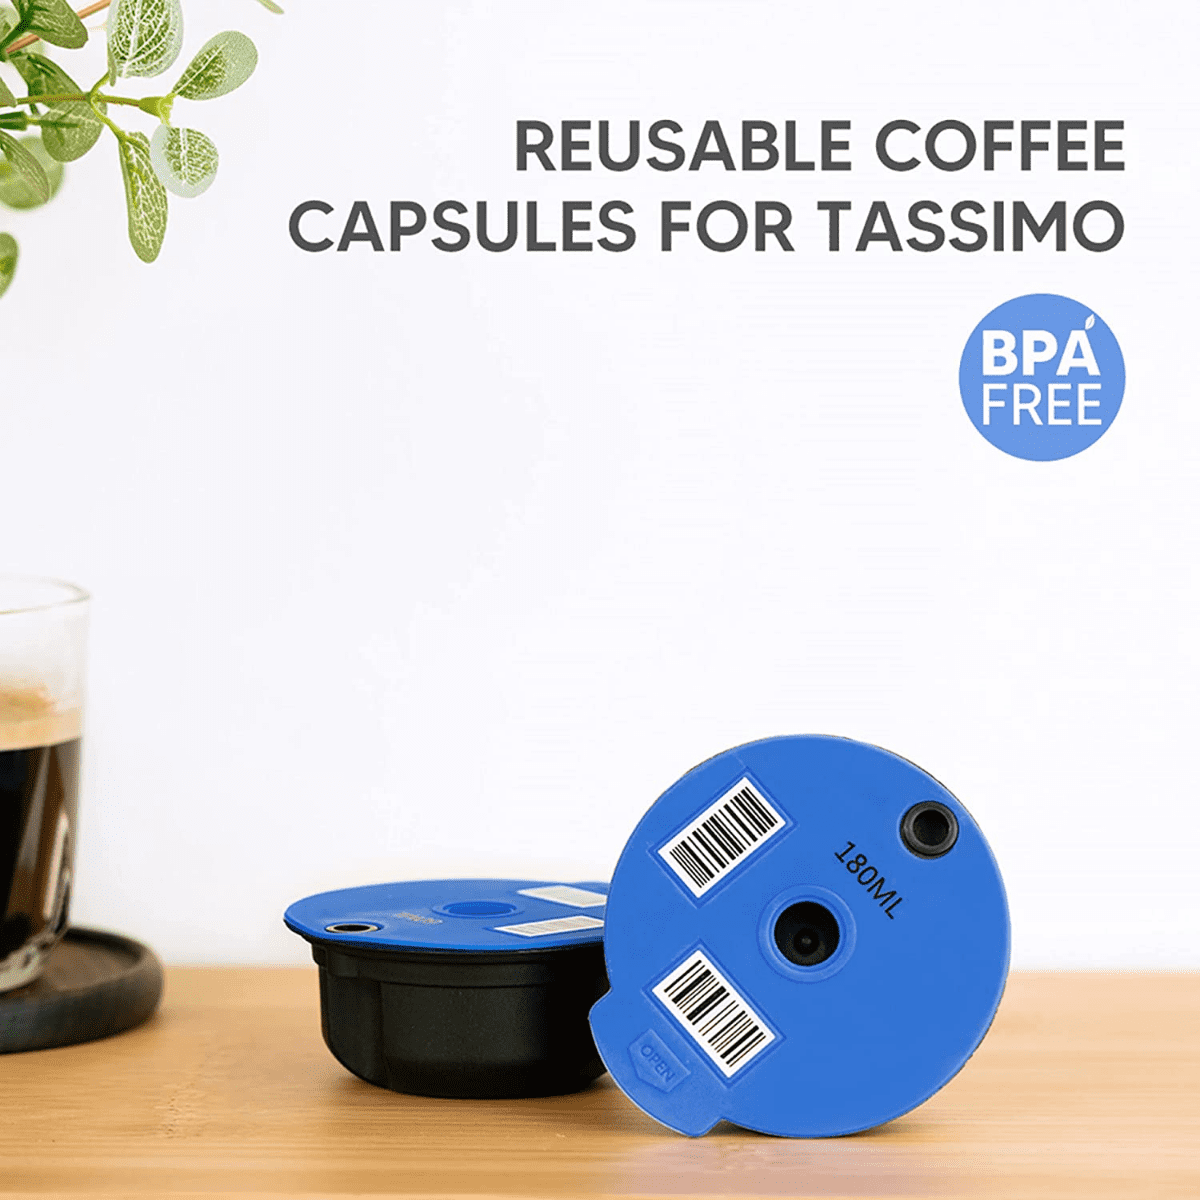  Tassimo Reusable Coffee Discs Refillable PP Coffee Capsule Pods  With Silicone Lid, BENFUCHEN Reusable Tassimo t Disc for Bosch Machine Tas  Brewer With Sample Paper Filters, Unique Yellow, 60ML+180ML: Home 